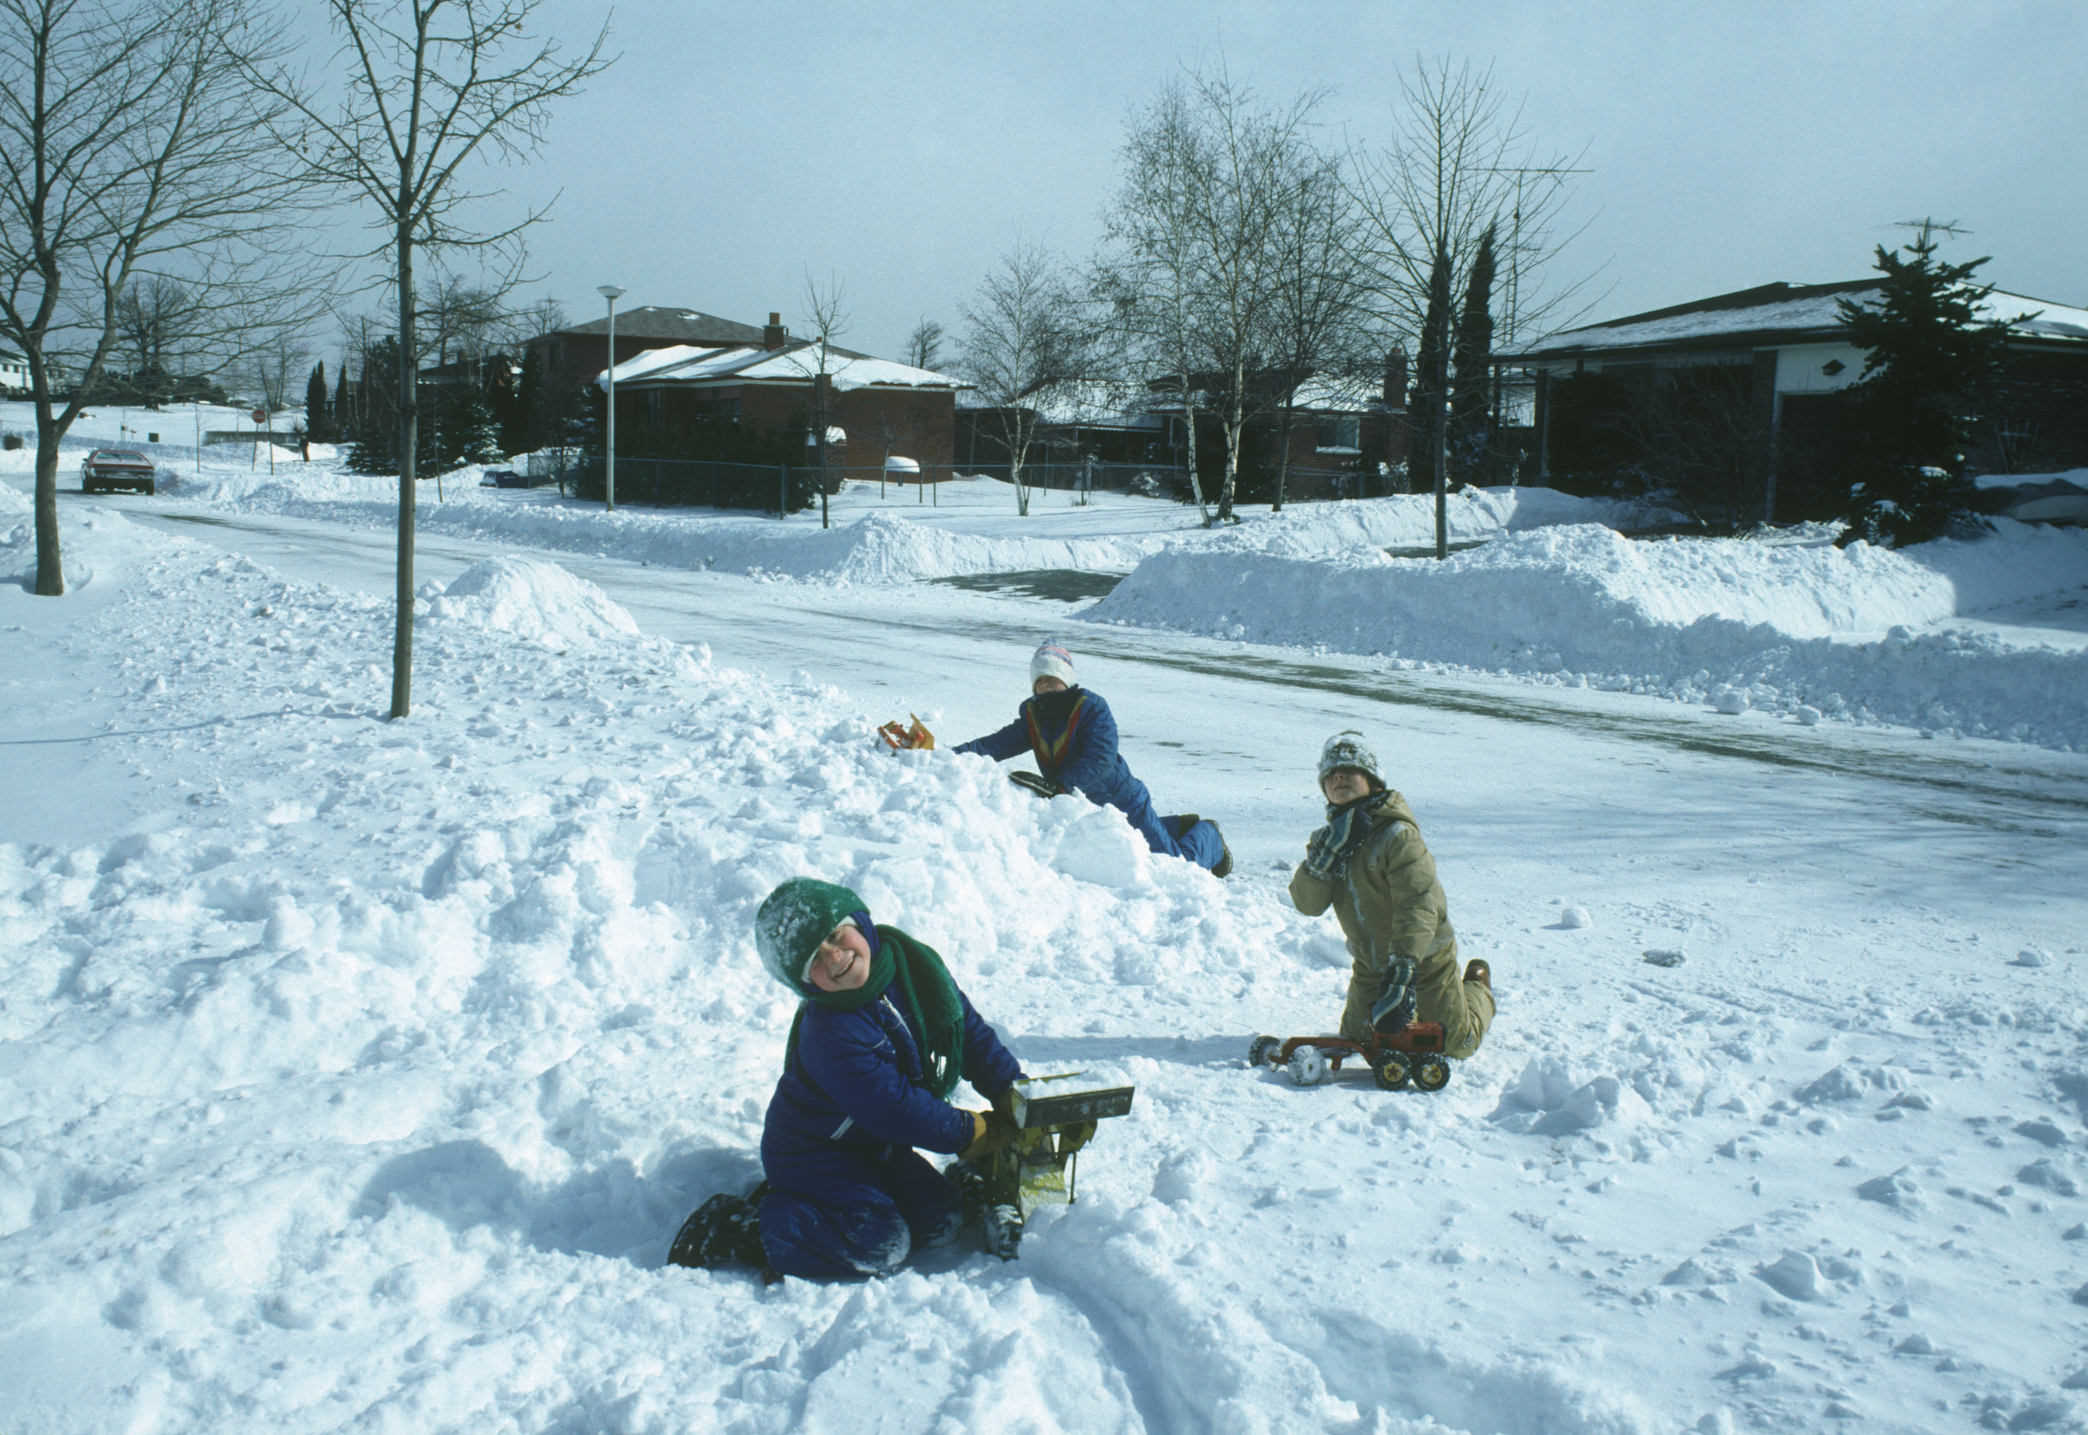 Three kids are enjoying a day in the snow